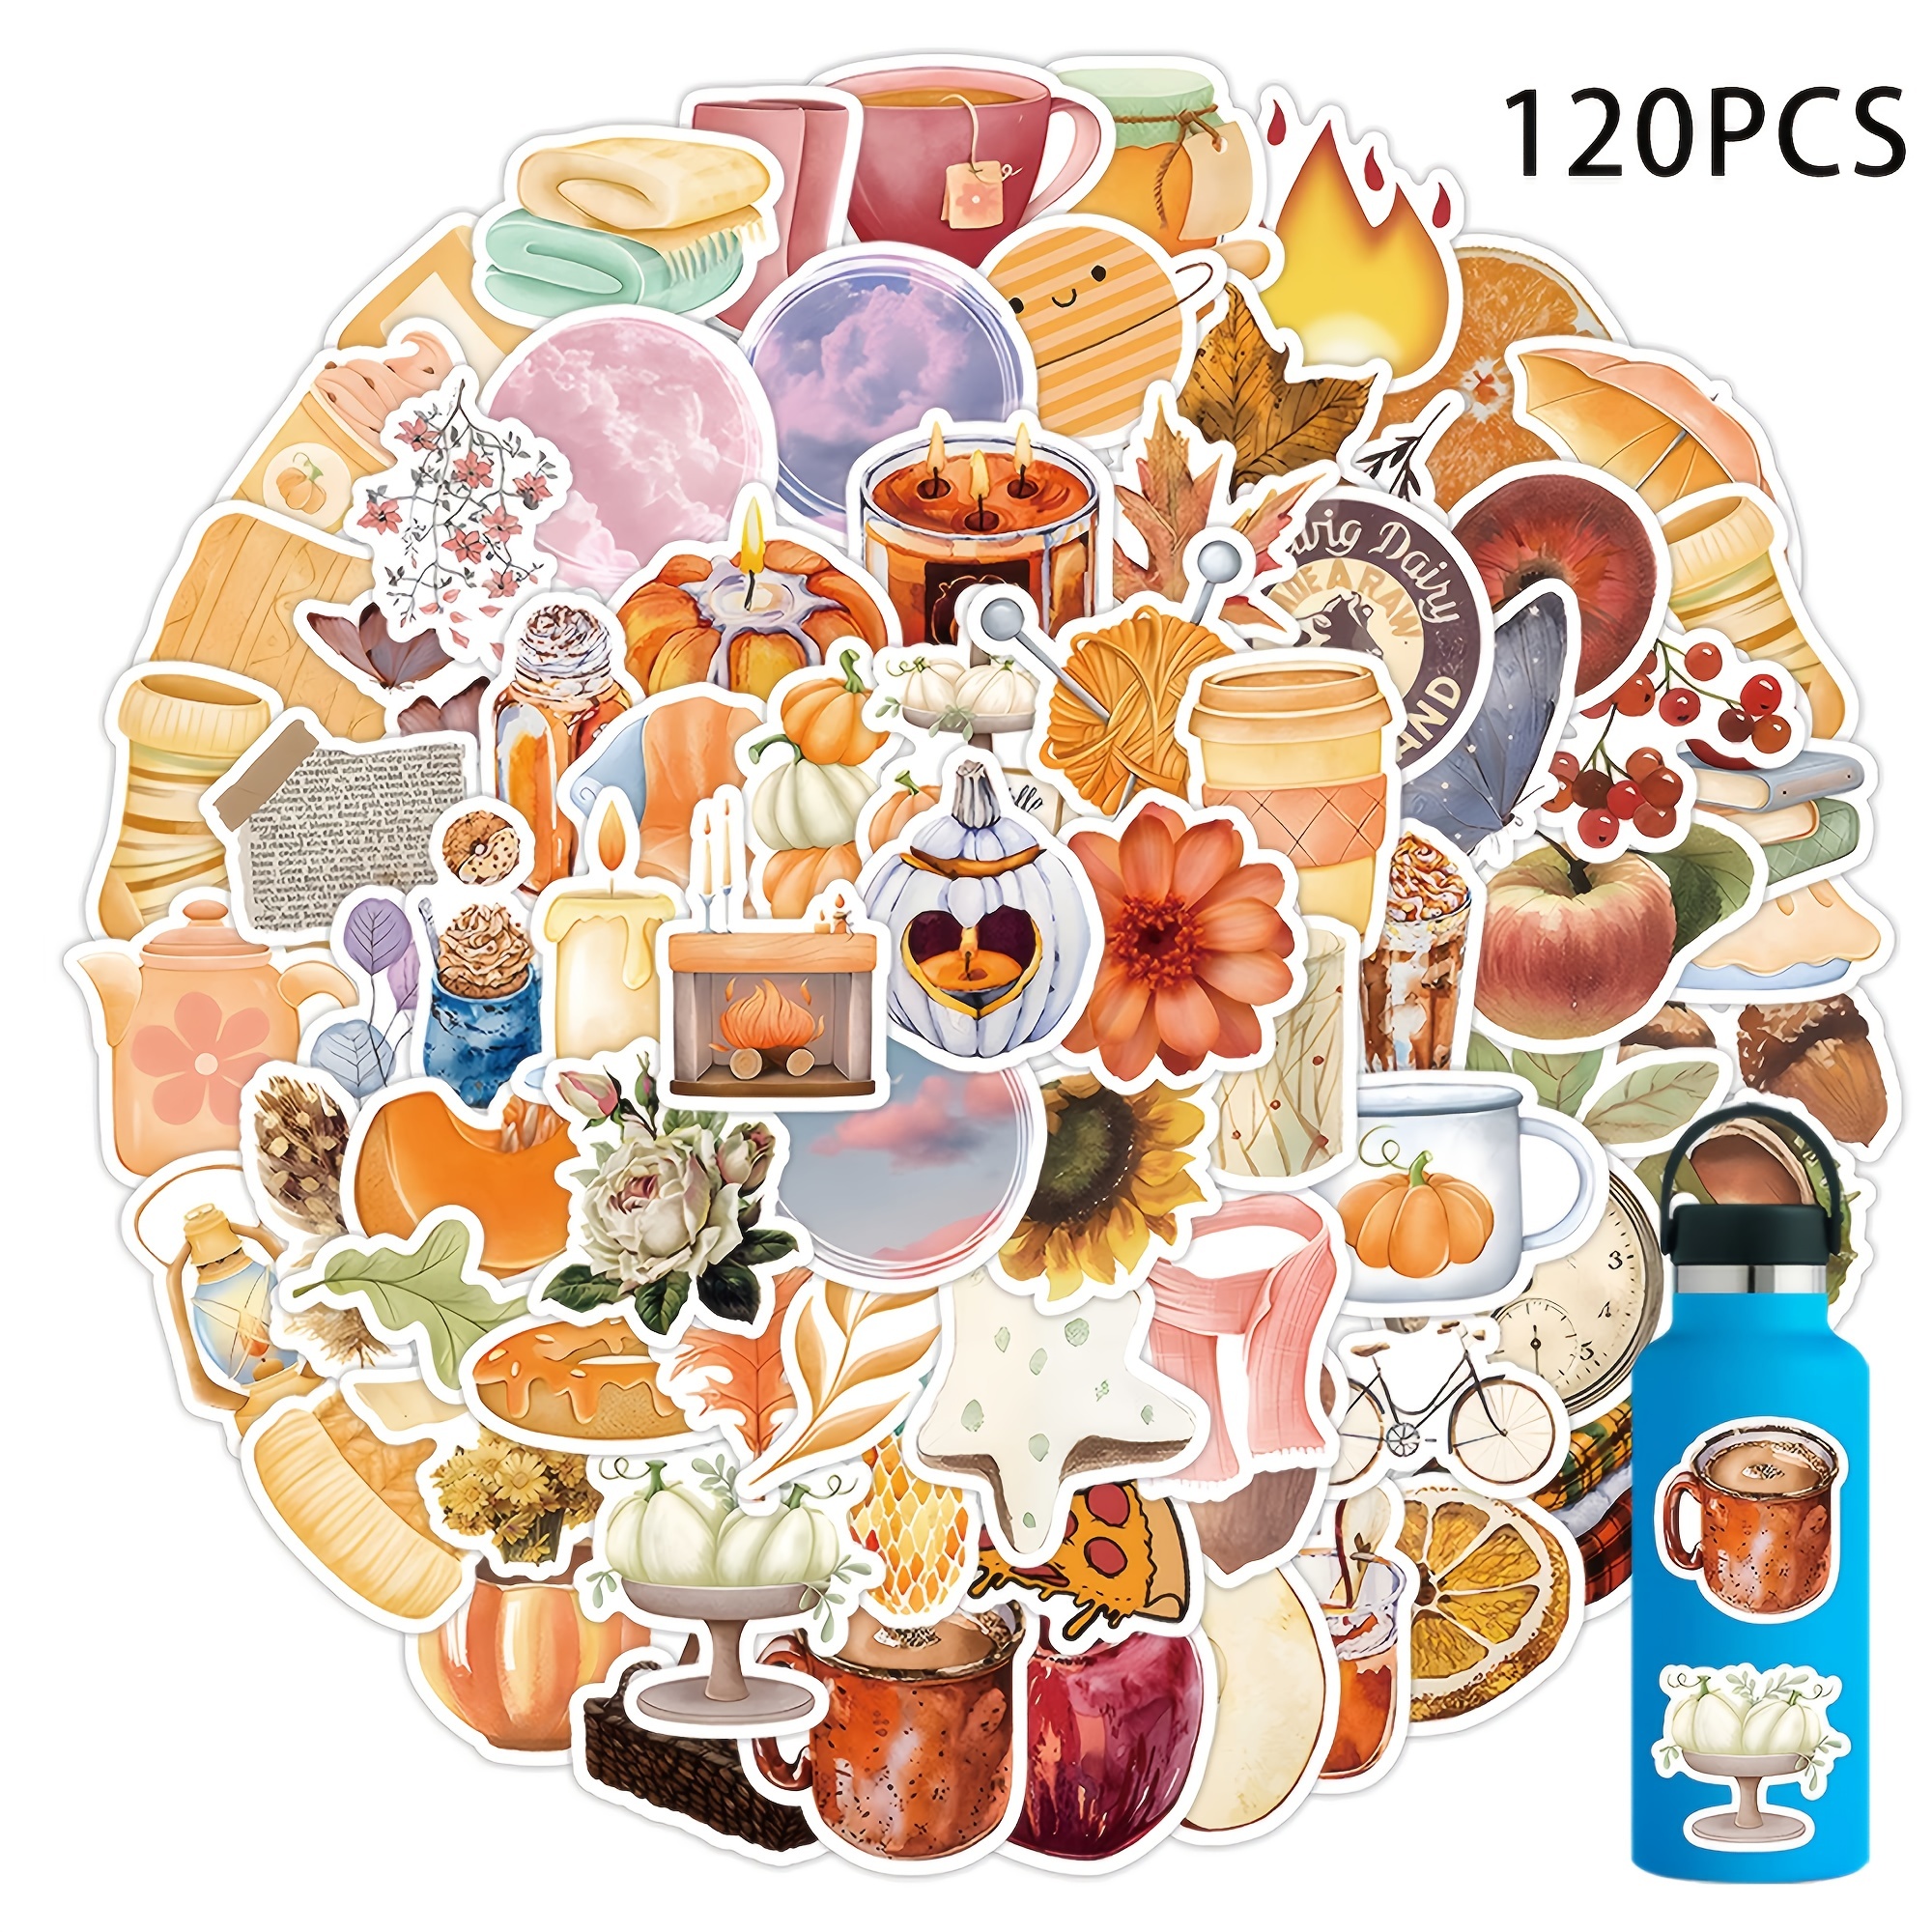 50 Stickers, Aesthetic Stickers, Cute Stickers For Water Bottles, Computer,  Laptop, Waterproof Stickers, Christmas Stocking Stuffers Sticker Packs